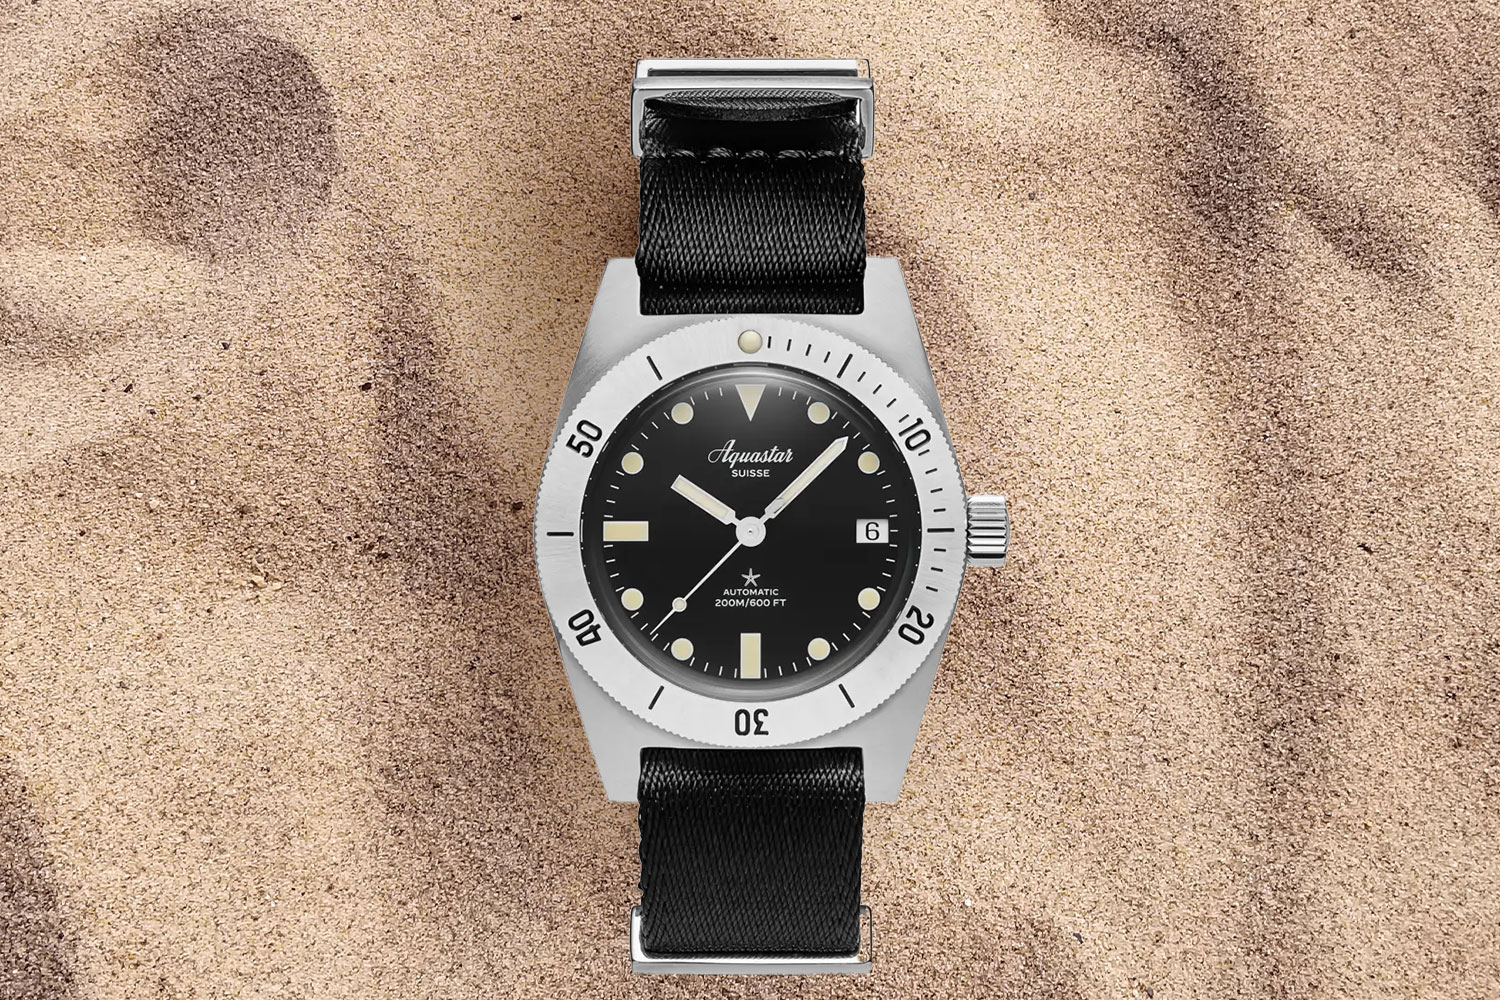 Black colored watch in the sand.